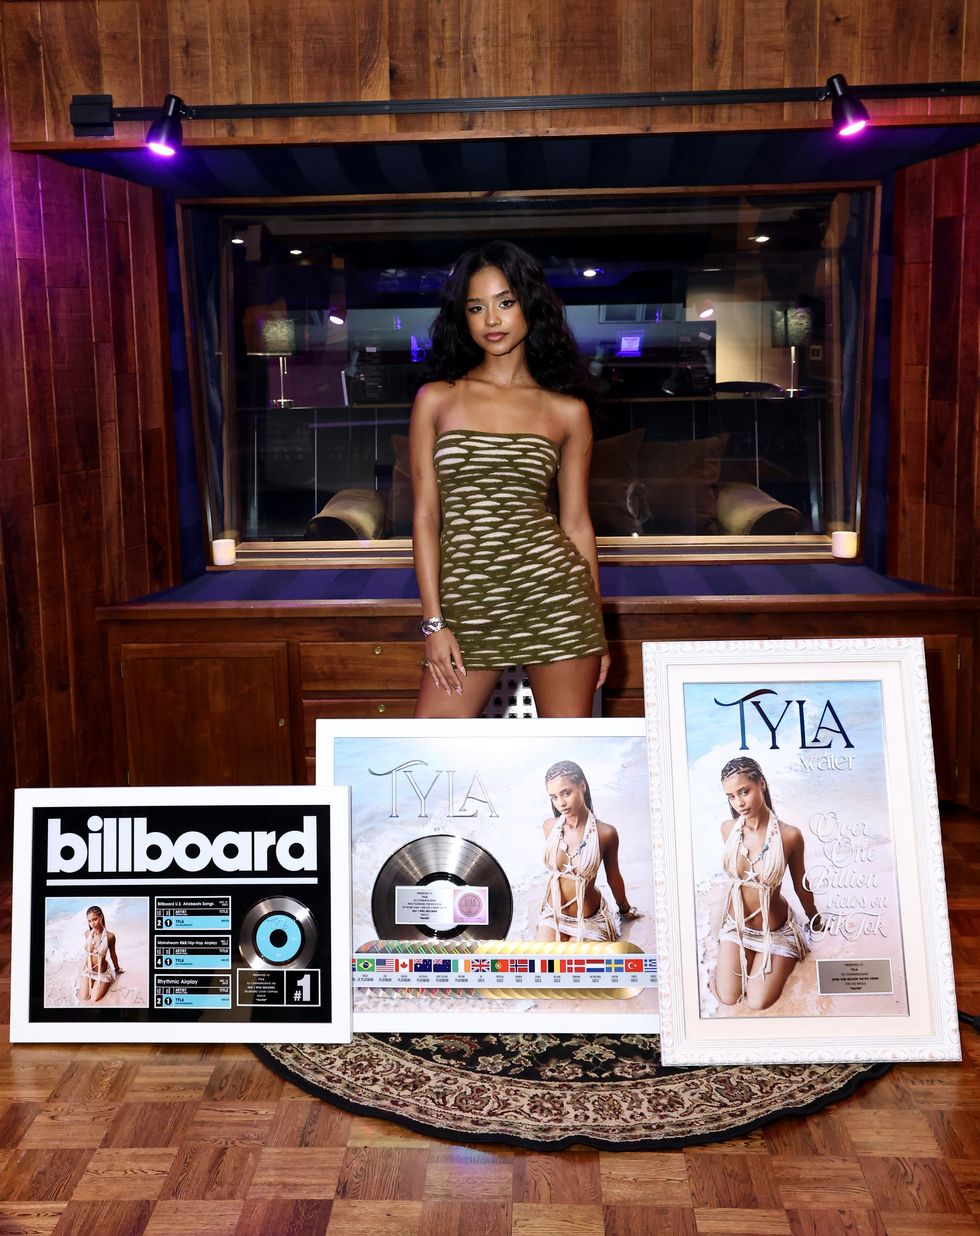 Tyla shows off her platinum plaque for "Water."